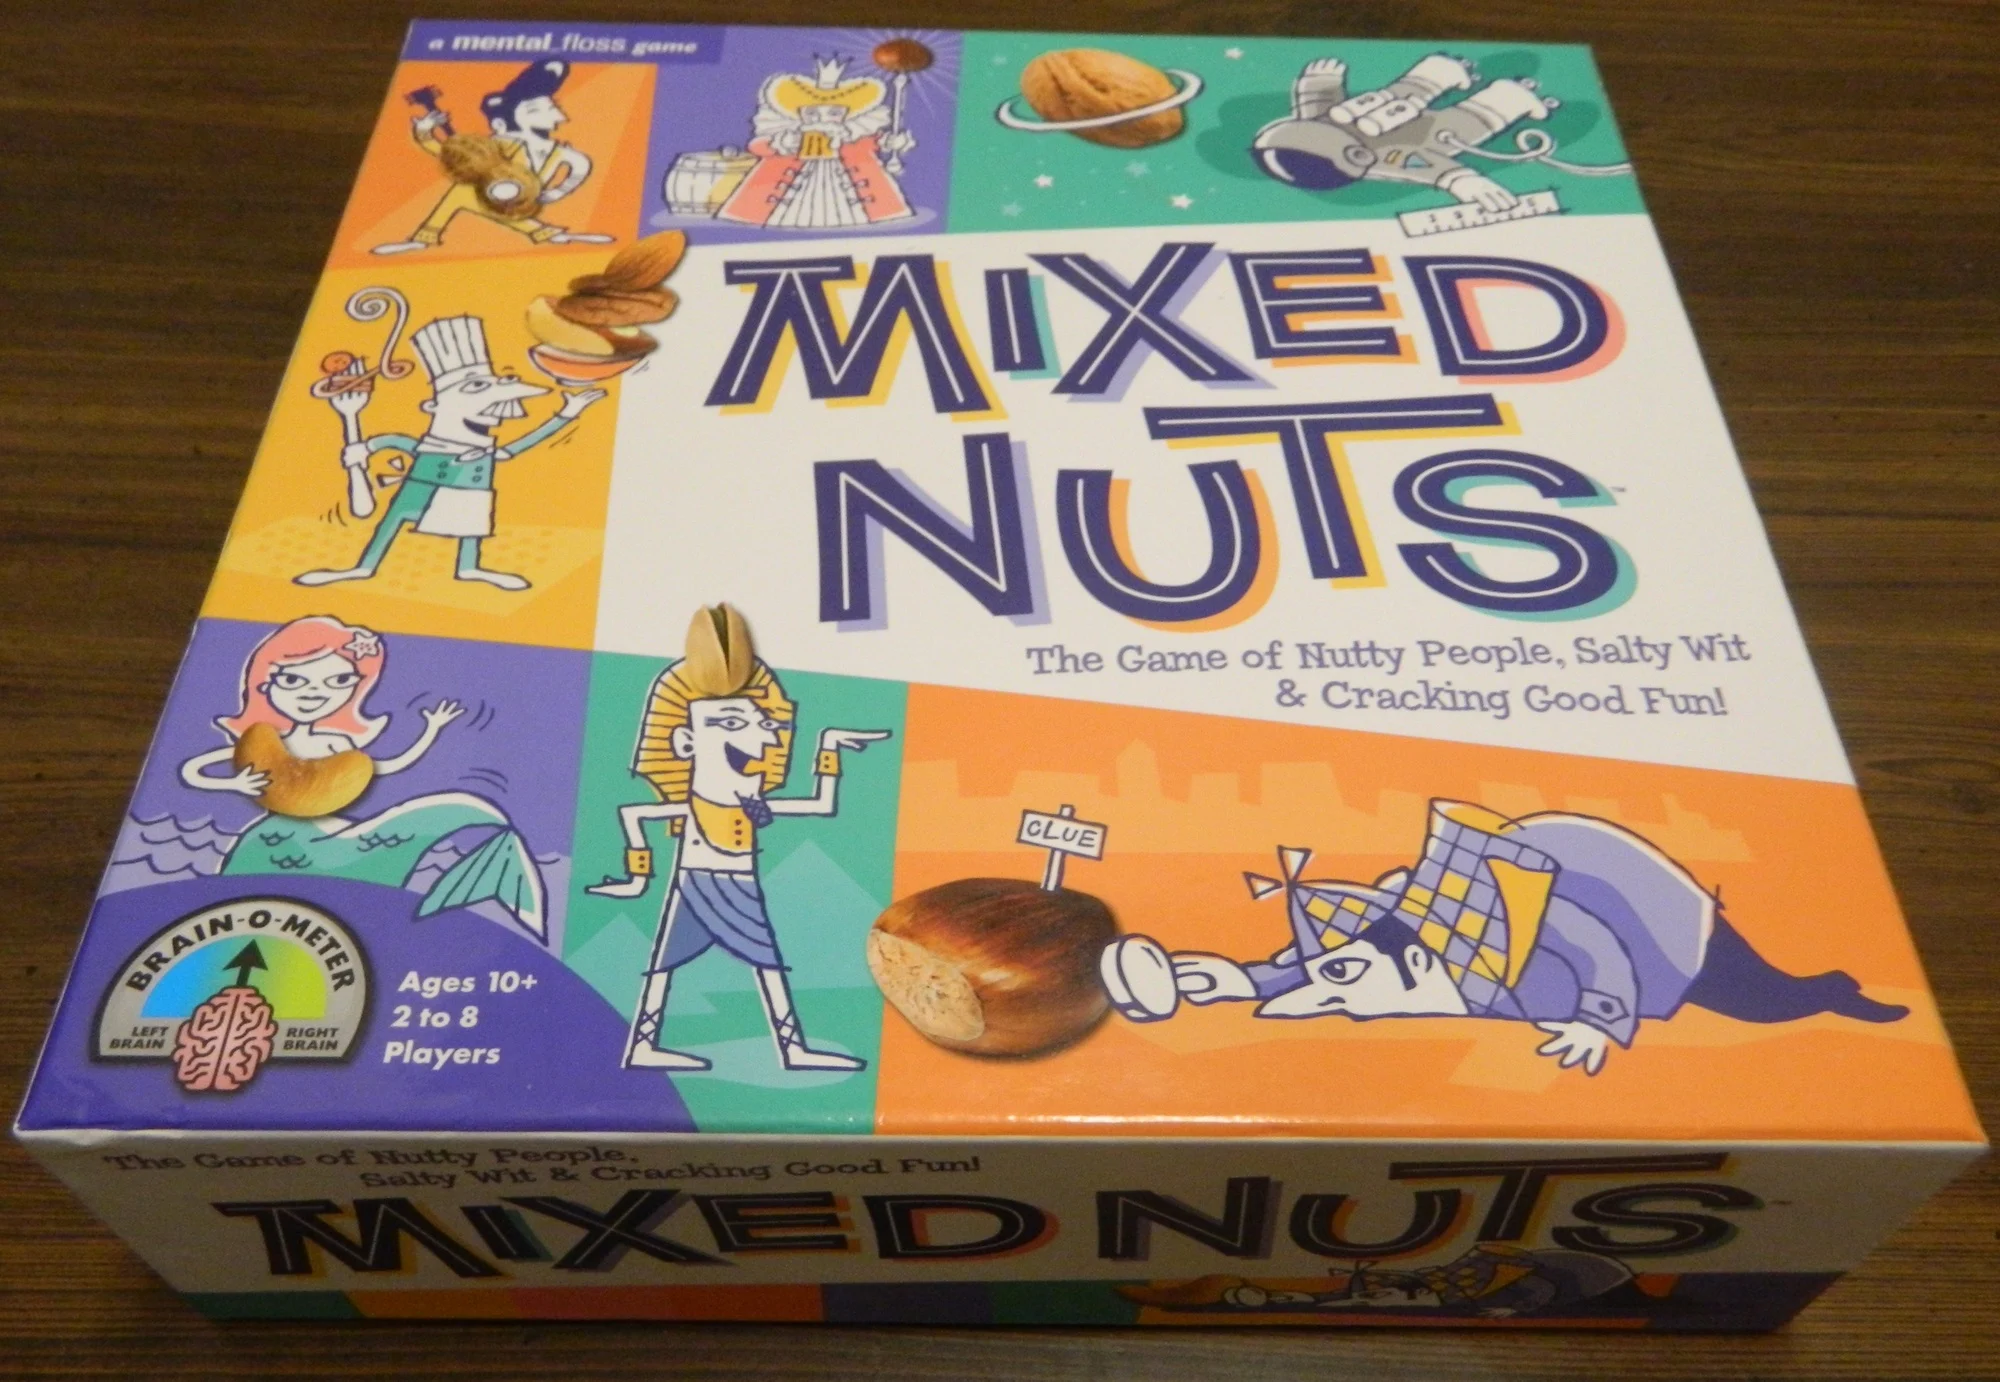 Box for Mixed Nuts